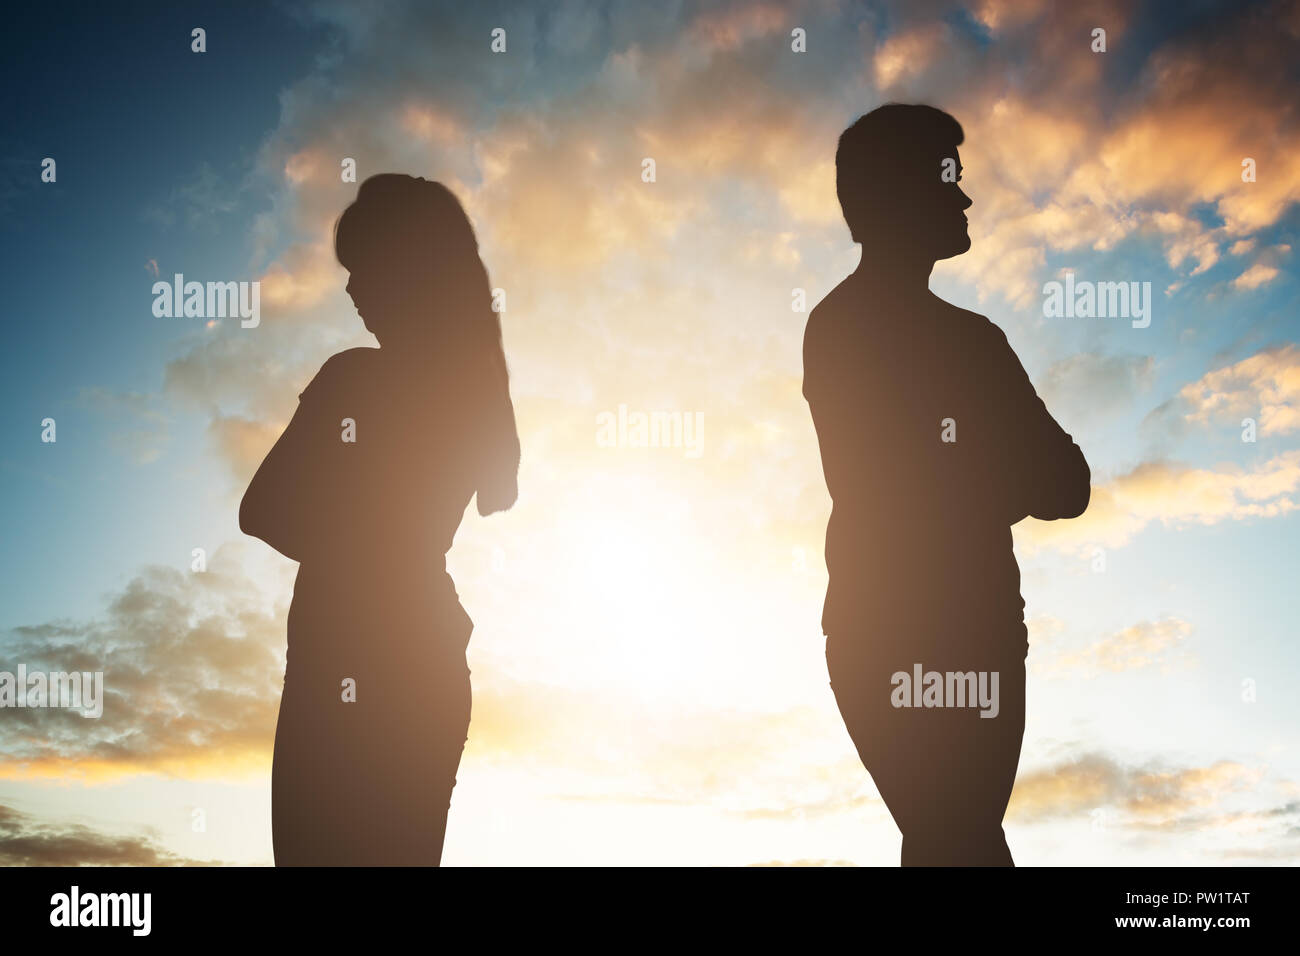 Silhouette Of A Unhappy Couple Standing Back To Back Against Cloudy Sky At Sunset Stock Photo